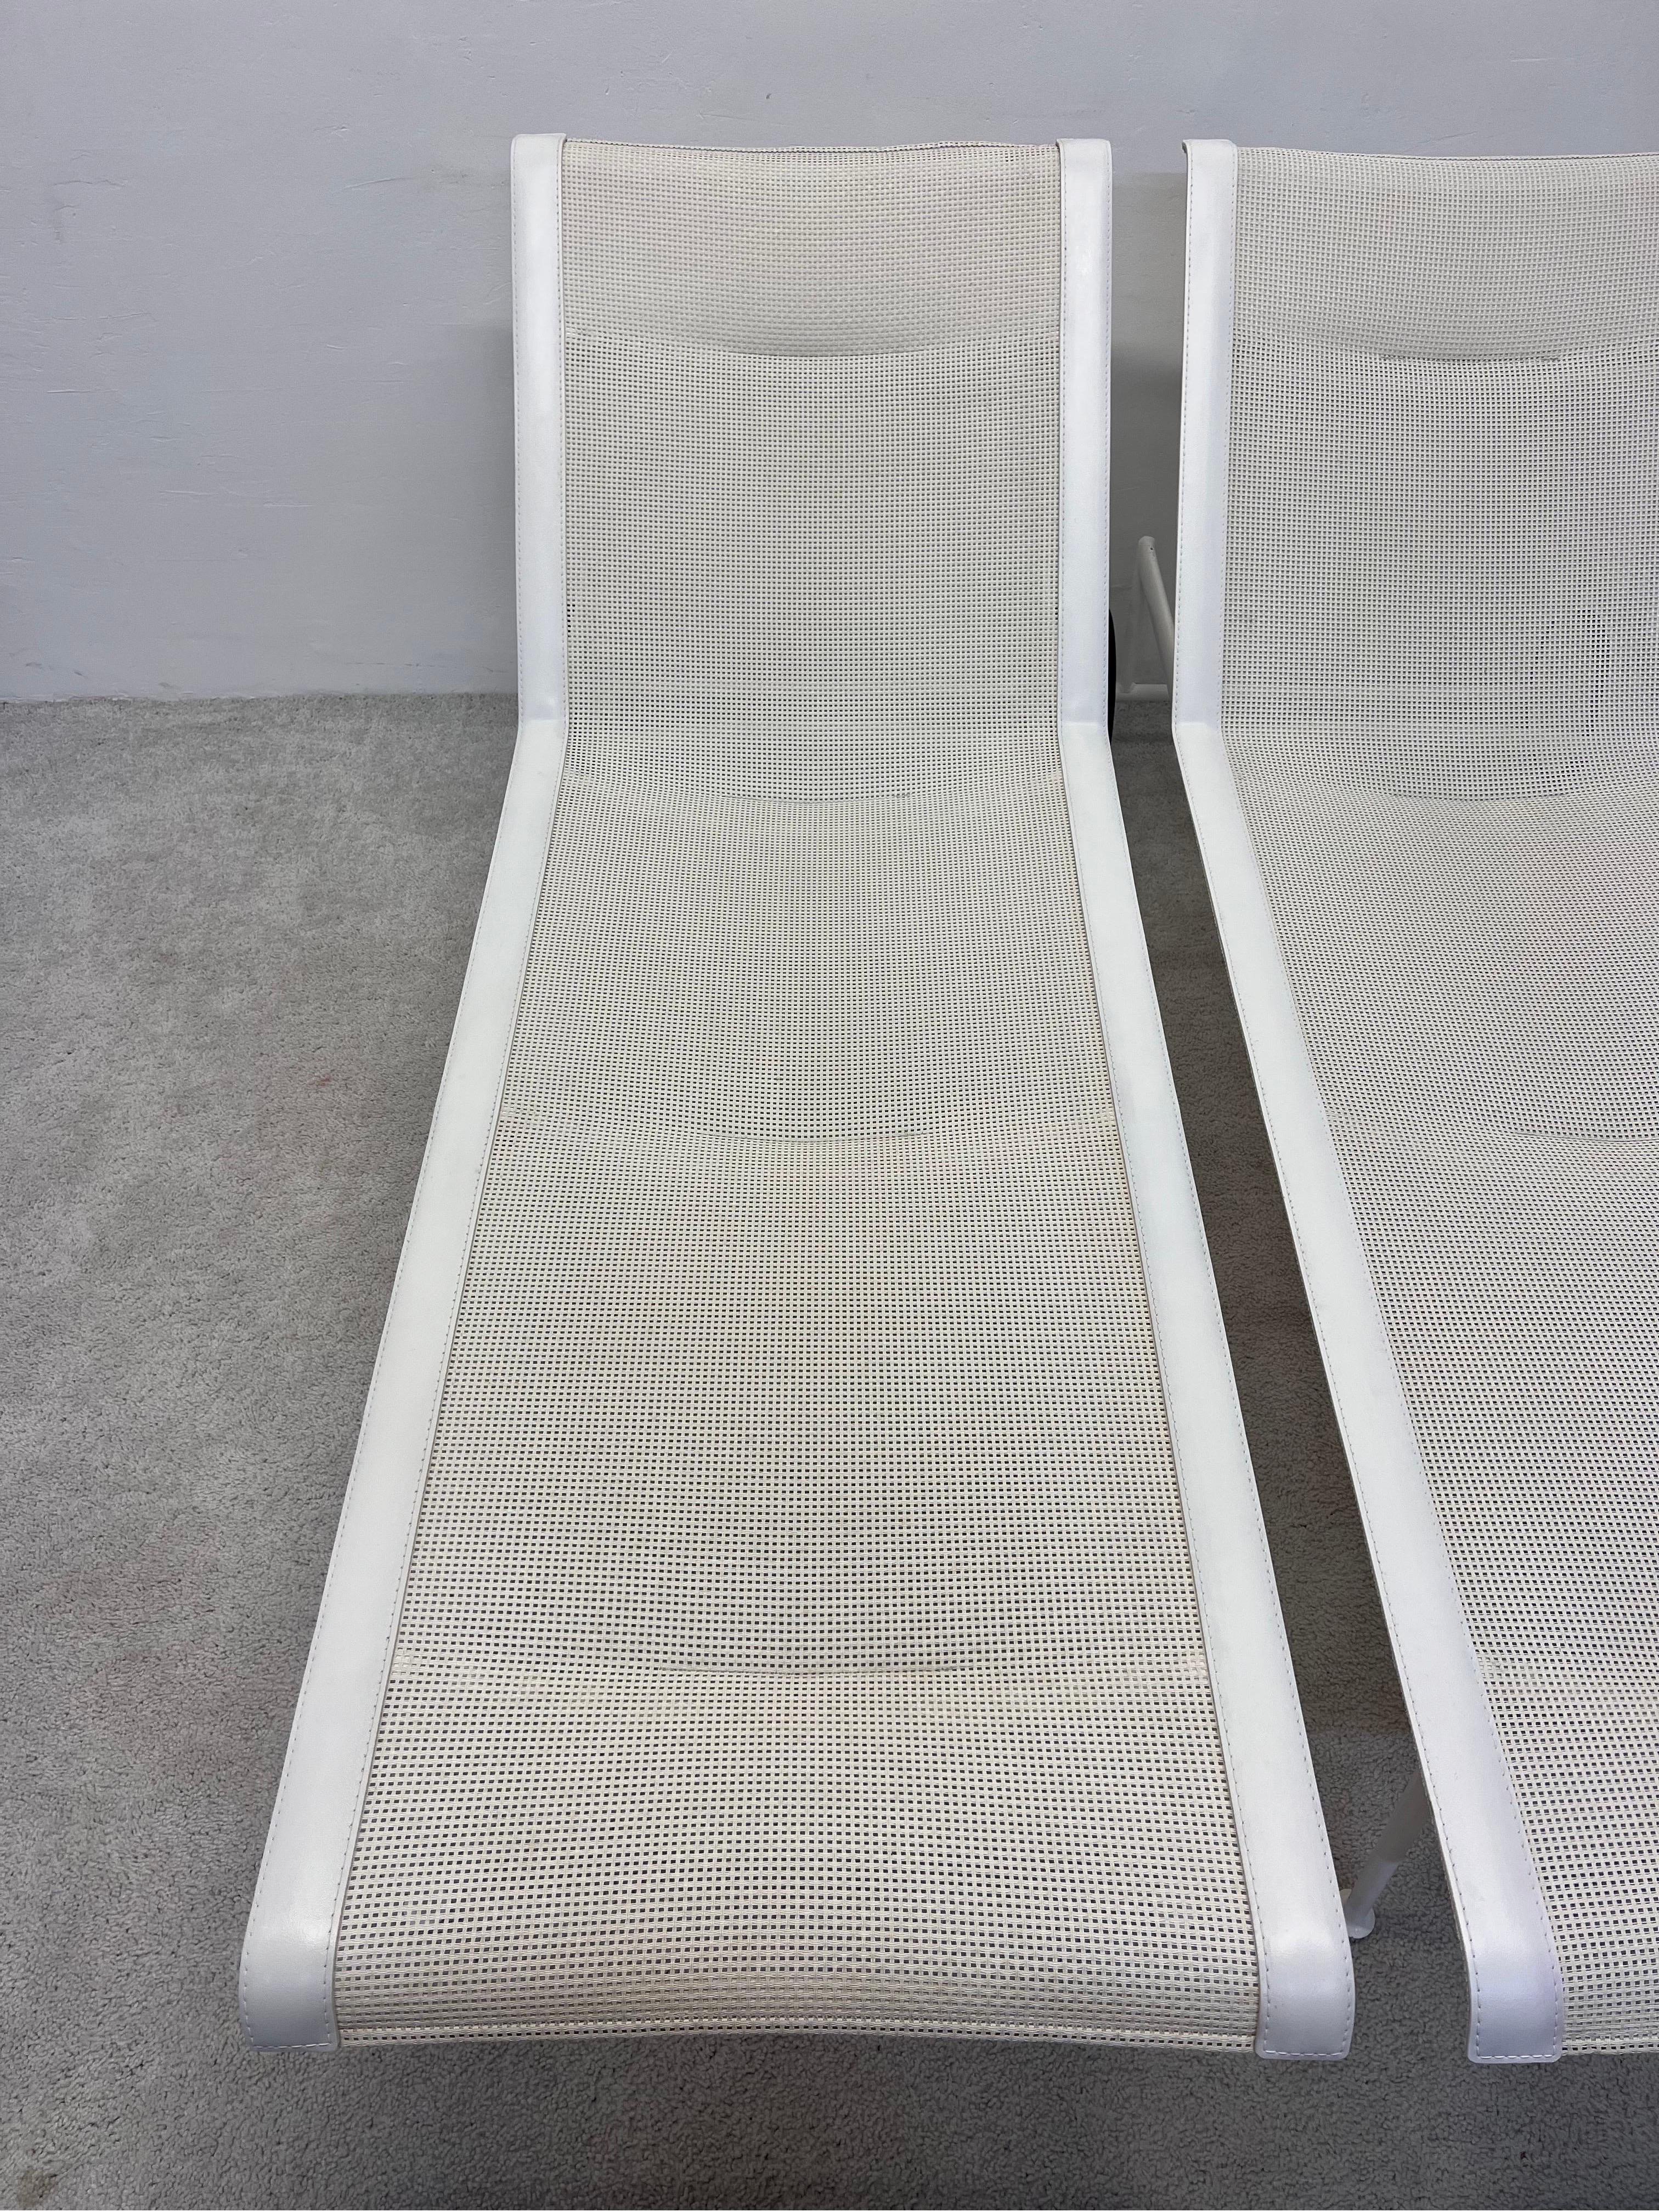 American Richard Schultz 1966 Adjustable Outdoor Chaise Lounges for Knoll - a Pair